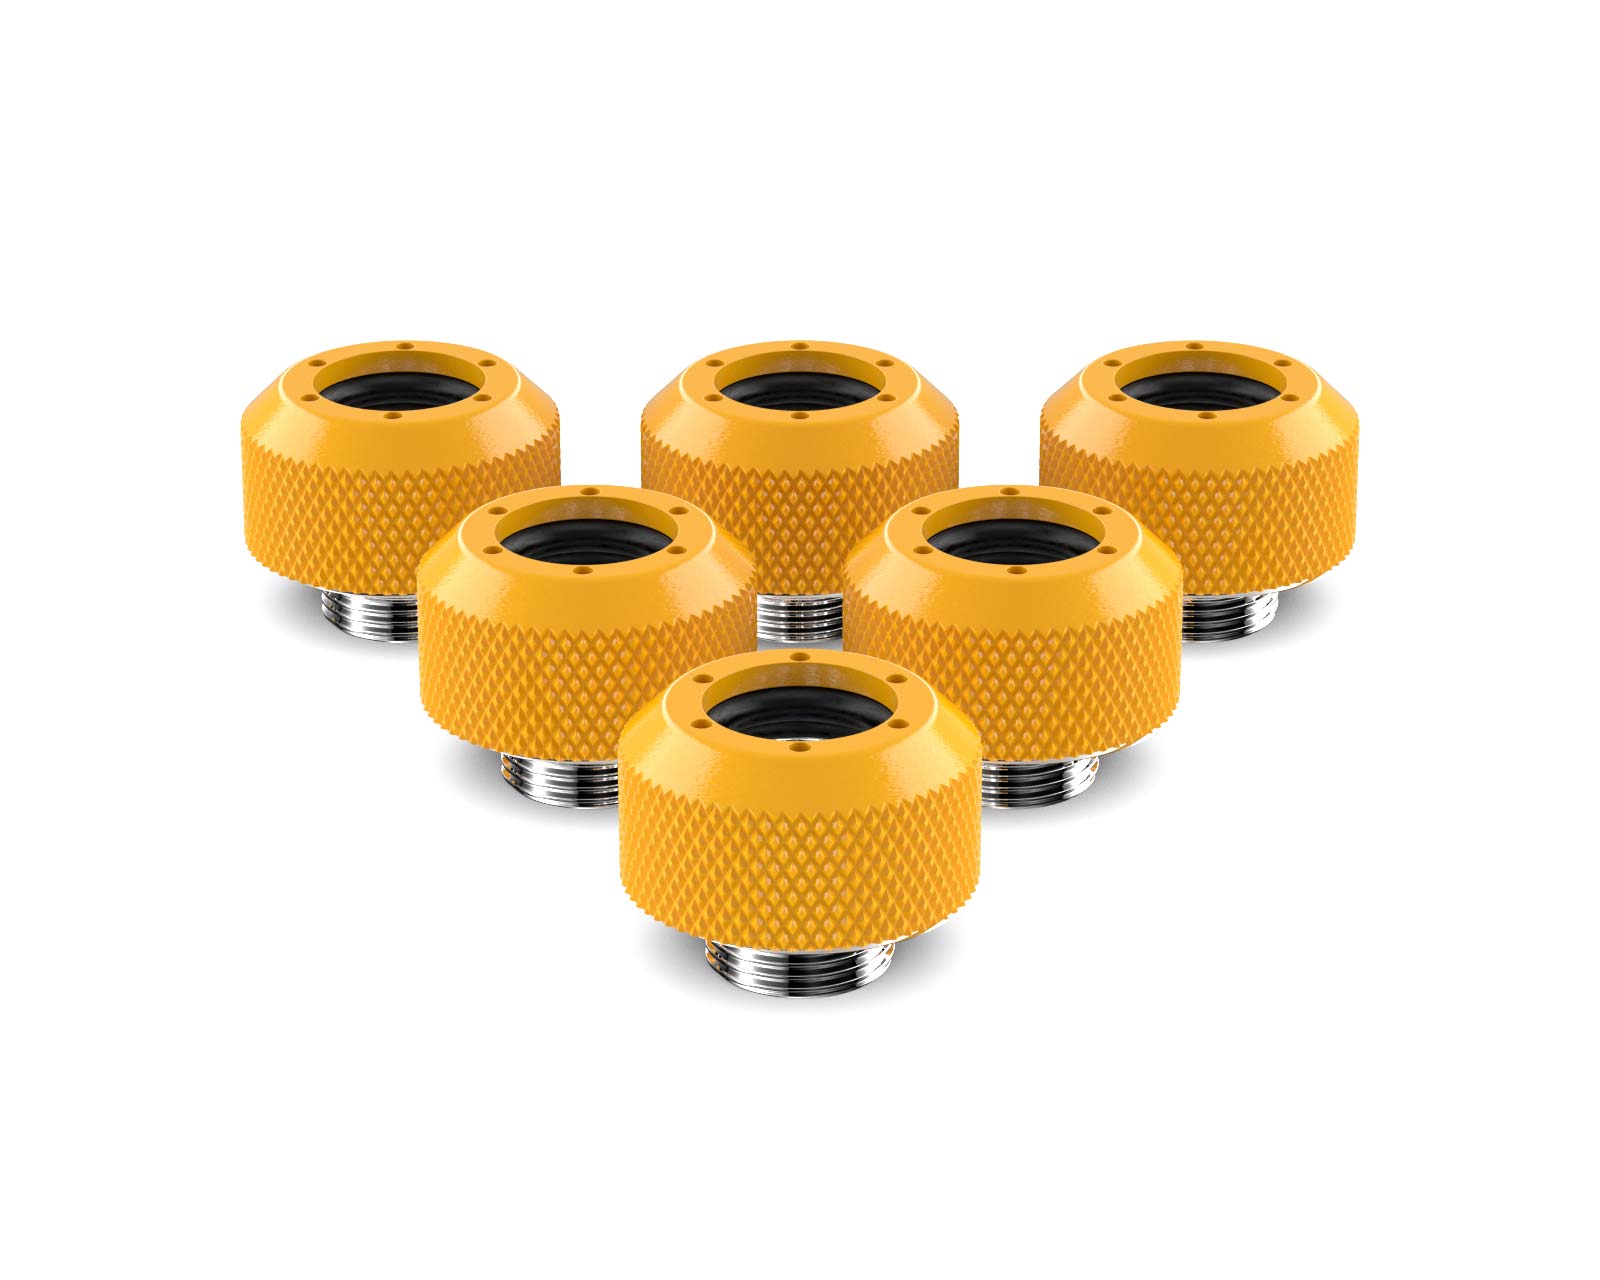 PrimoChill 1/2in. Rigid RevolverSX Series Fitting - 6 pack - PrimoChill - KEEPING IT COOL Yellow